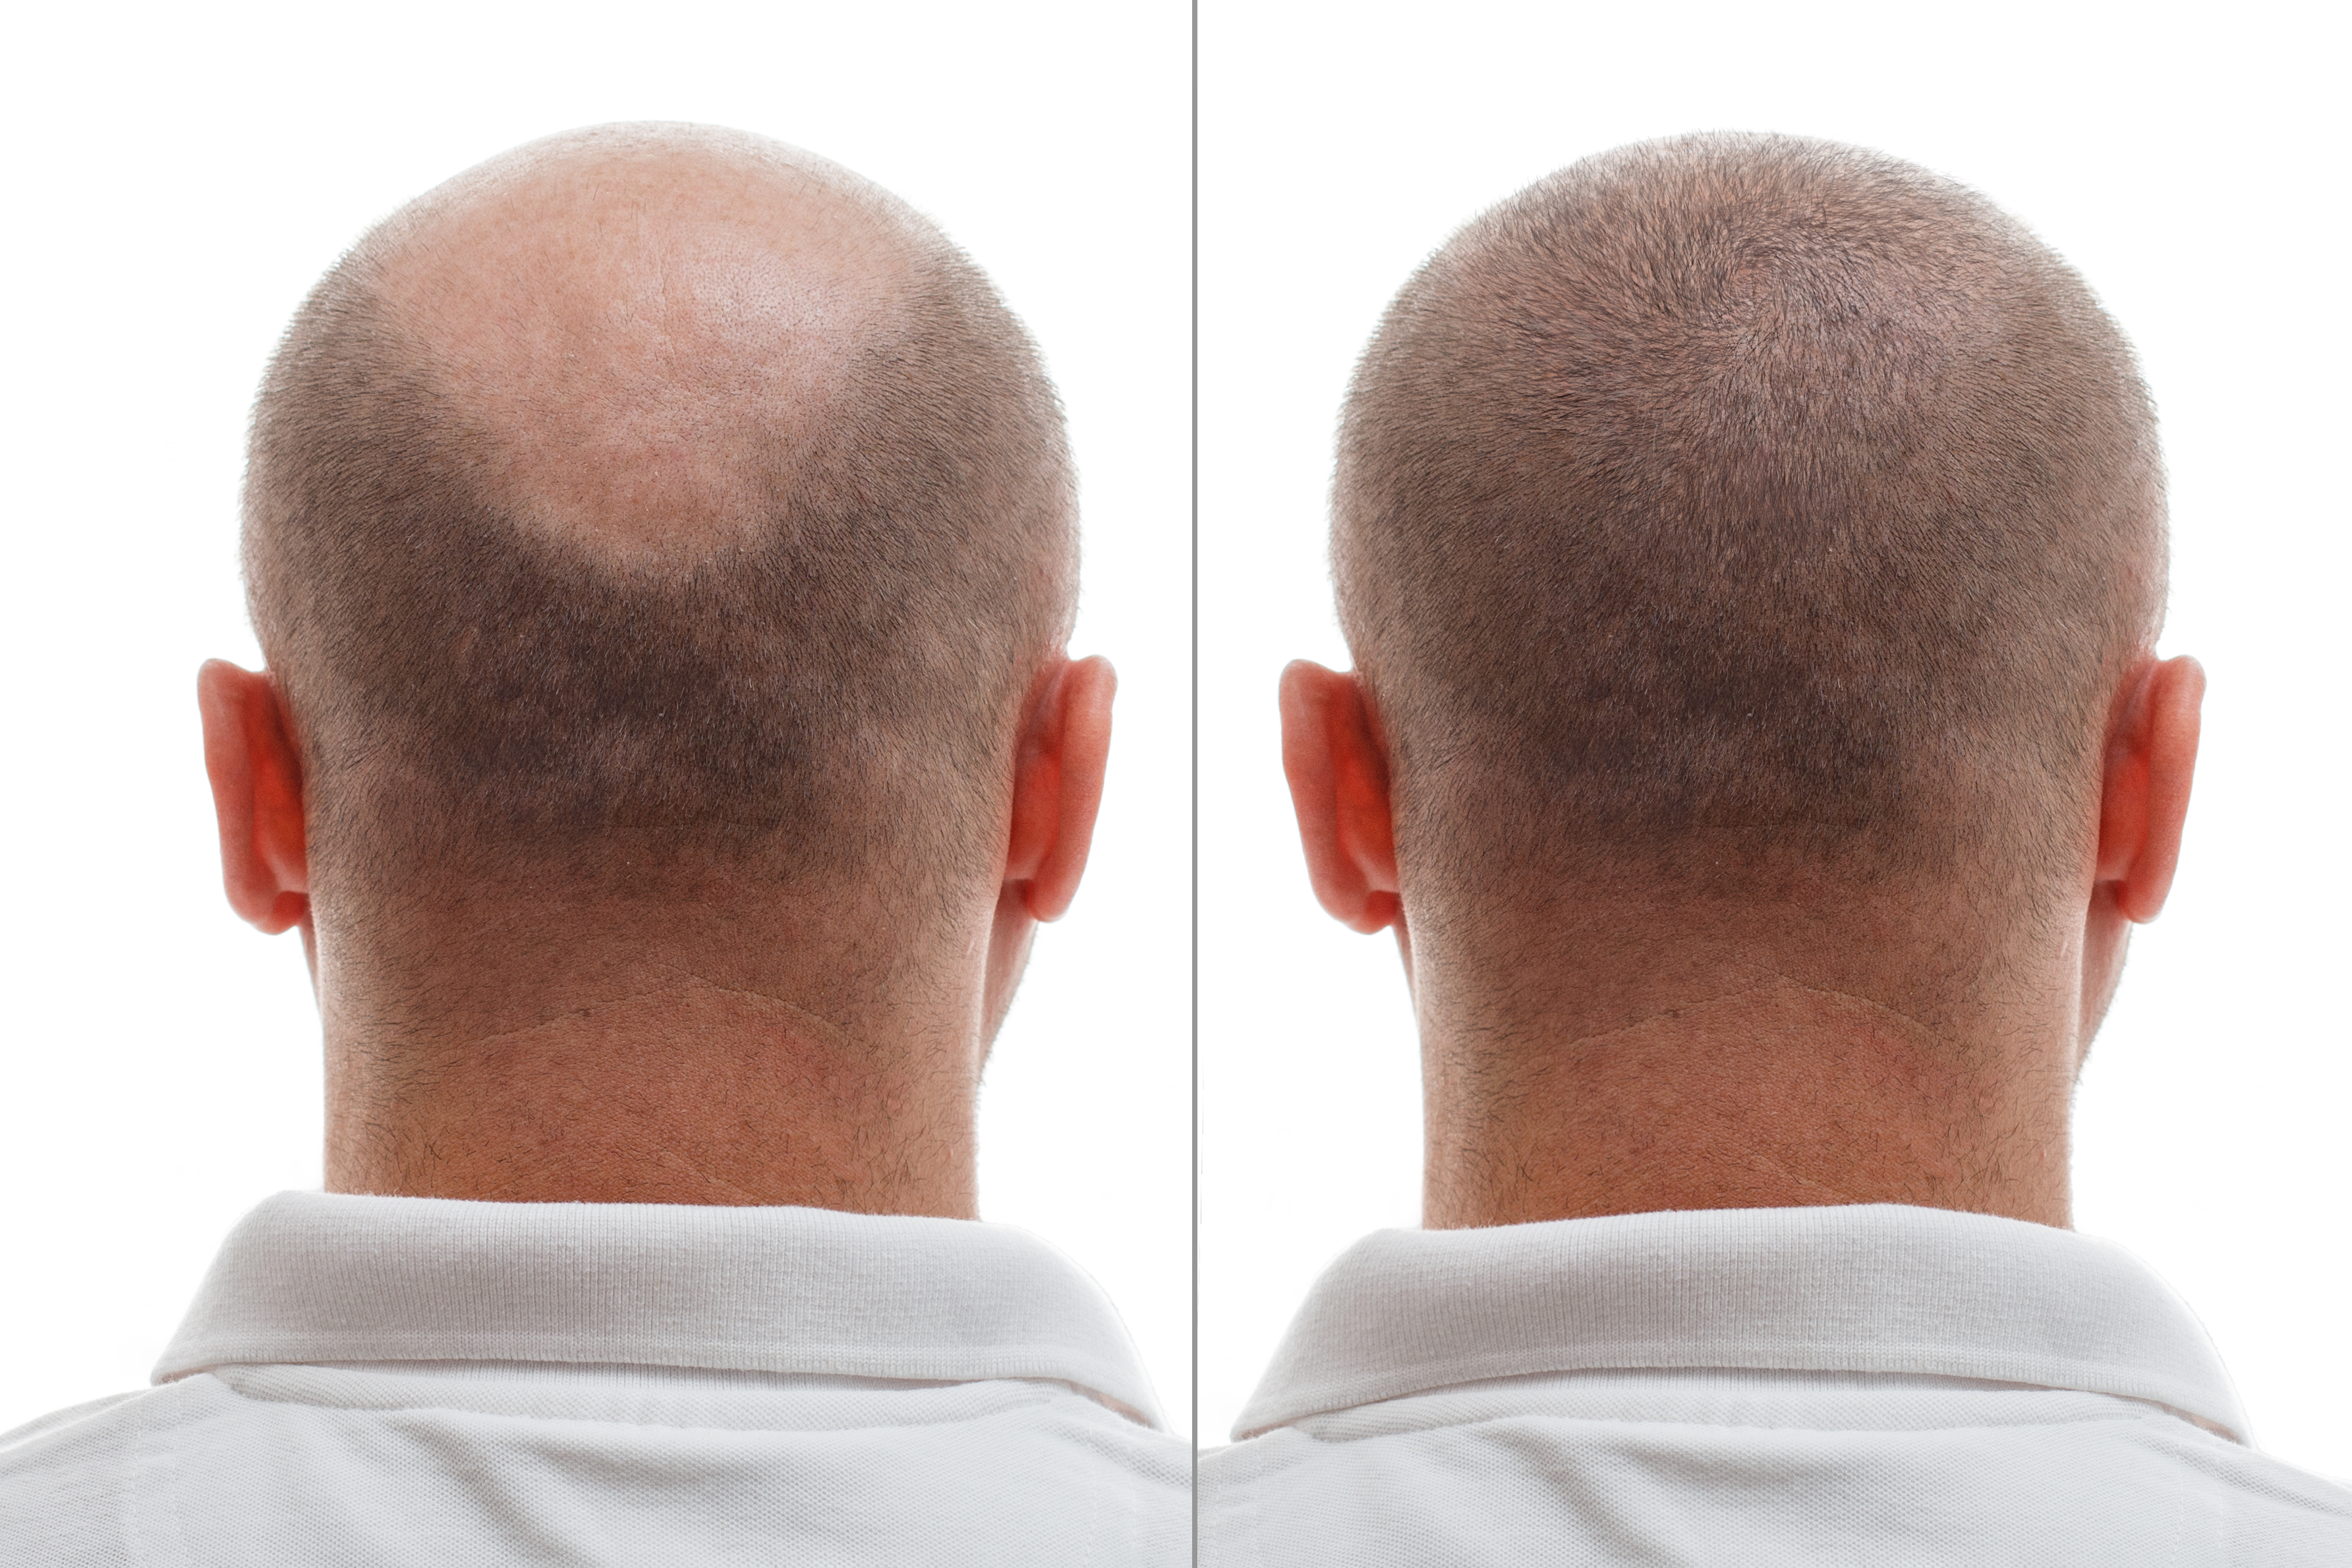 head-balding-man-before-after-hair-transplant-surgery-man-losing-his-hair-has-become (1)